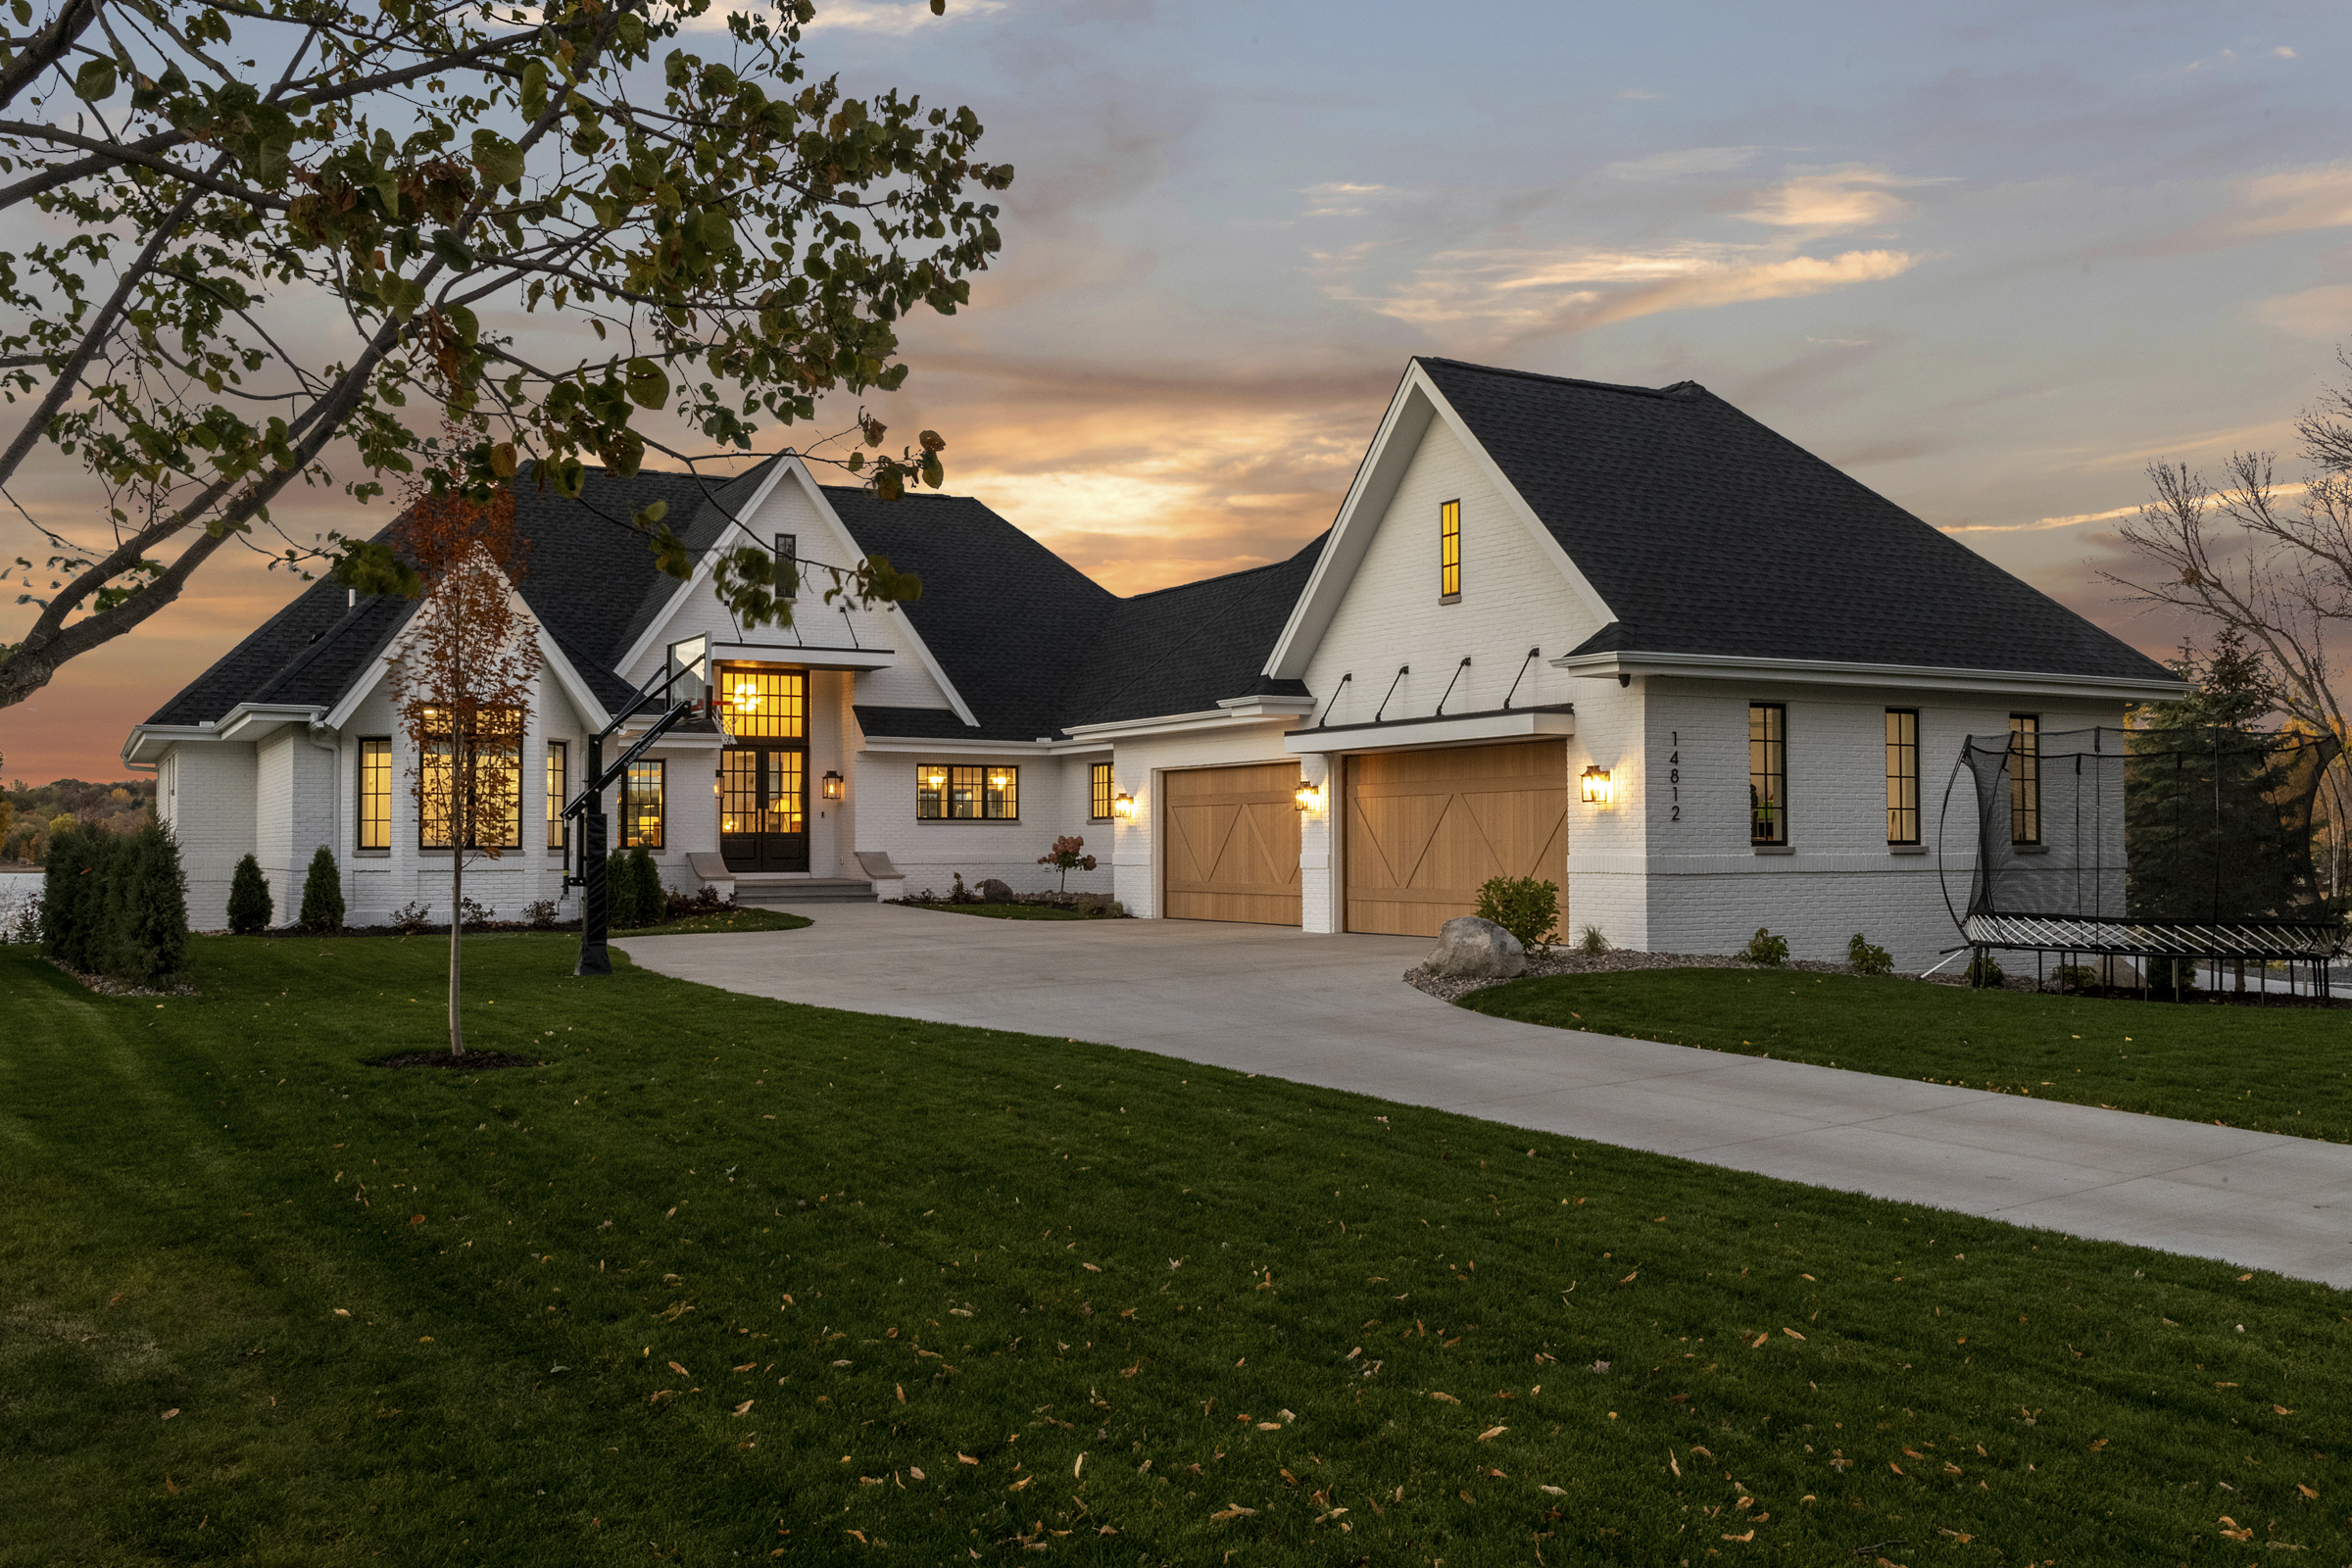 A modern home with a large driveway and large garage.